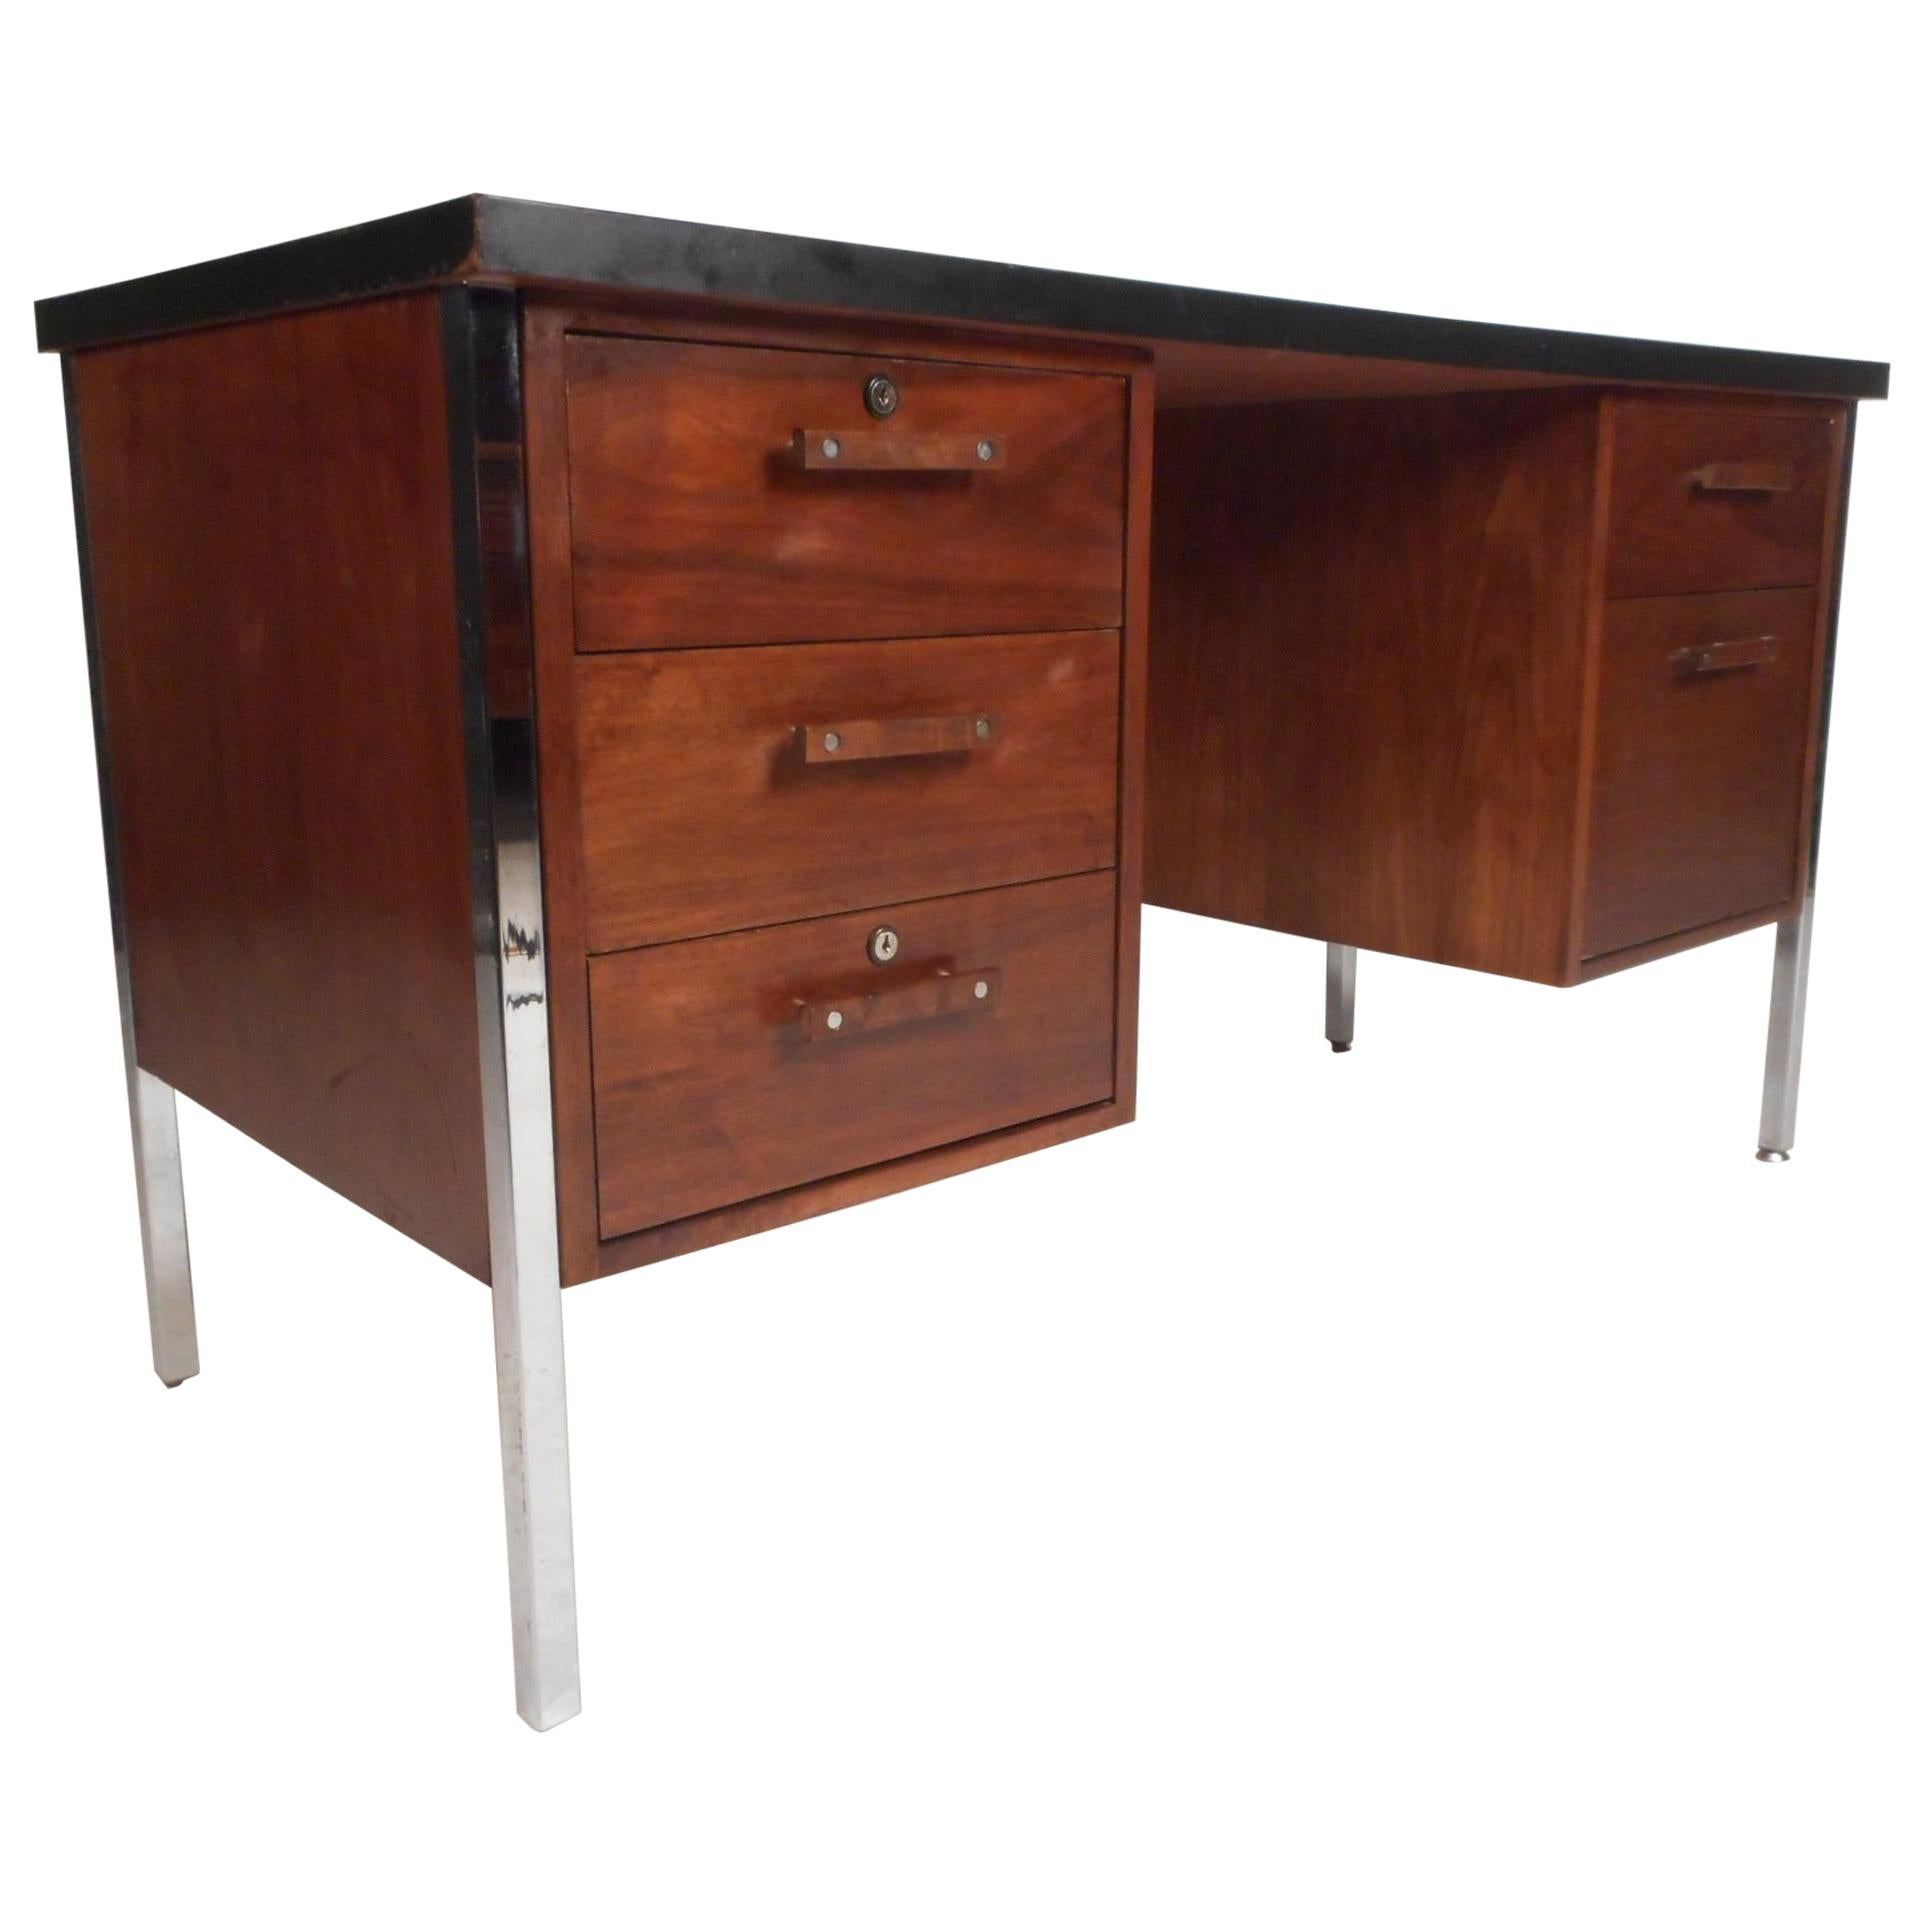 Mid-Century Modern Desk by Design Craft with a Finished Back